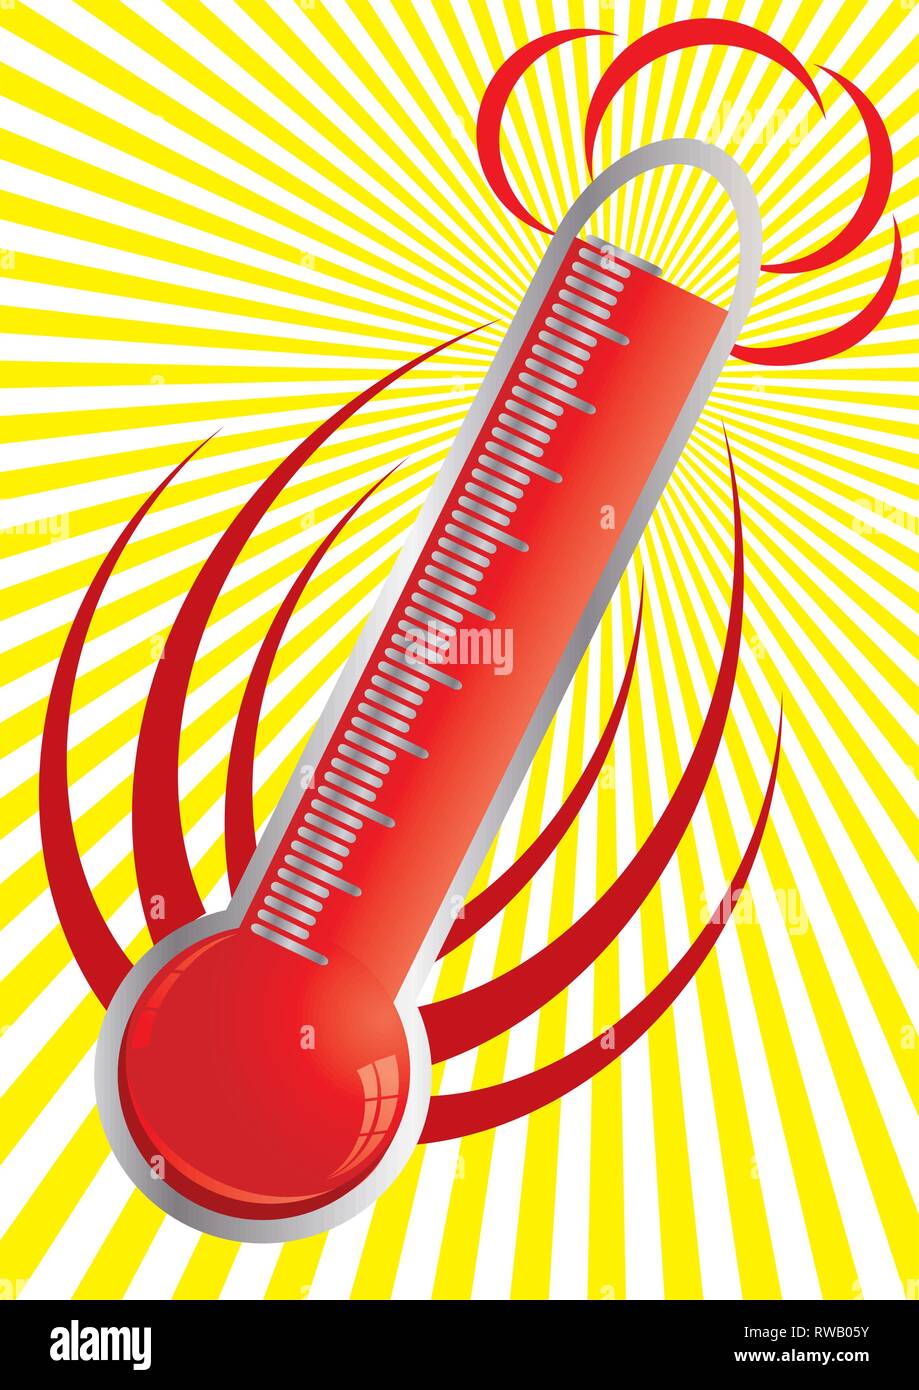 Illustration of heat, hot flaming thermometer, part 3, vector Stock Vector